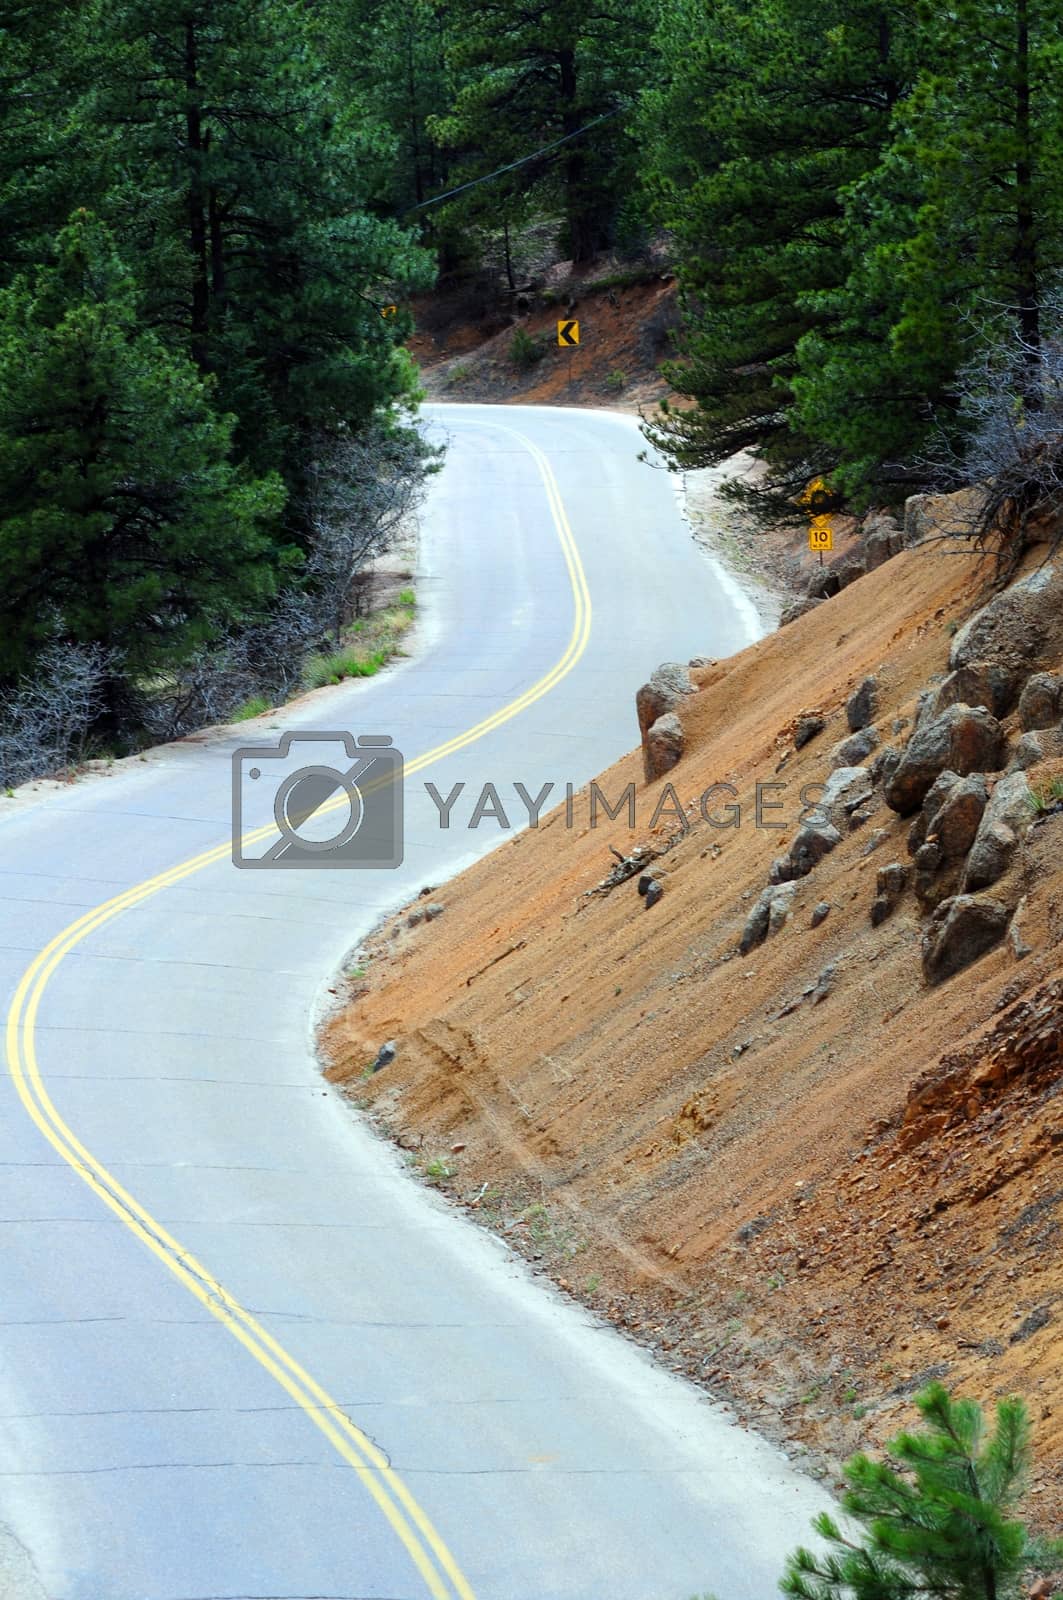 Royalty free image of Road Curves by welcomia